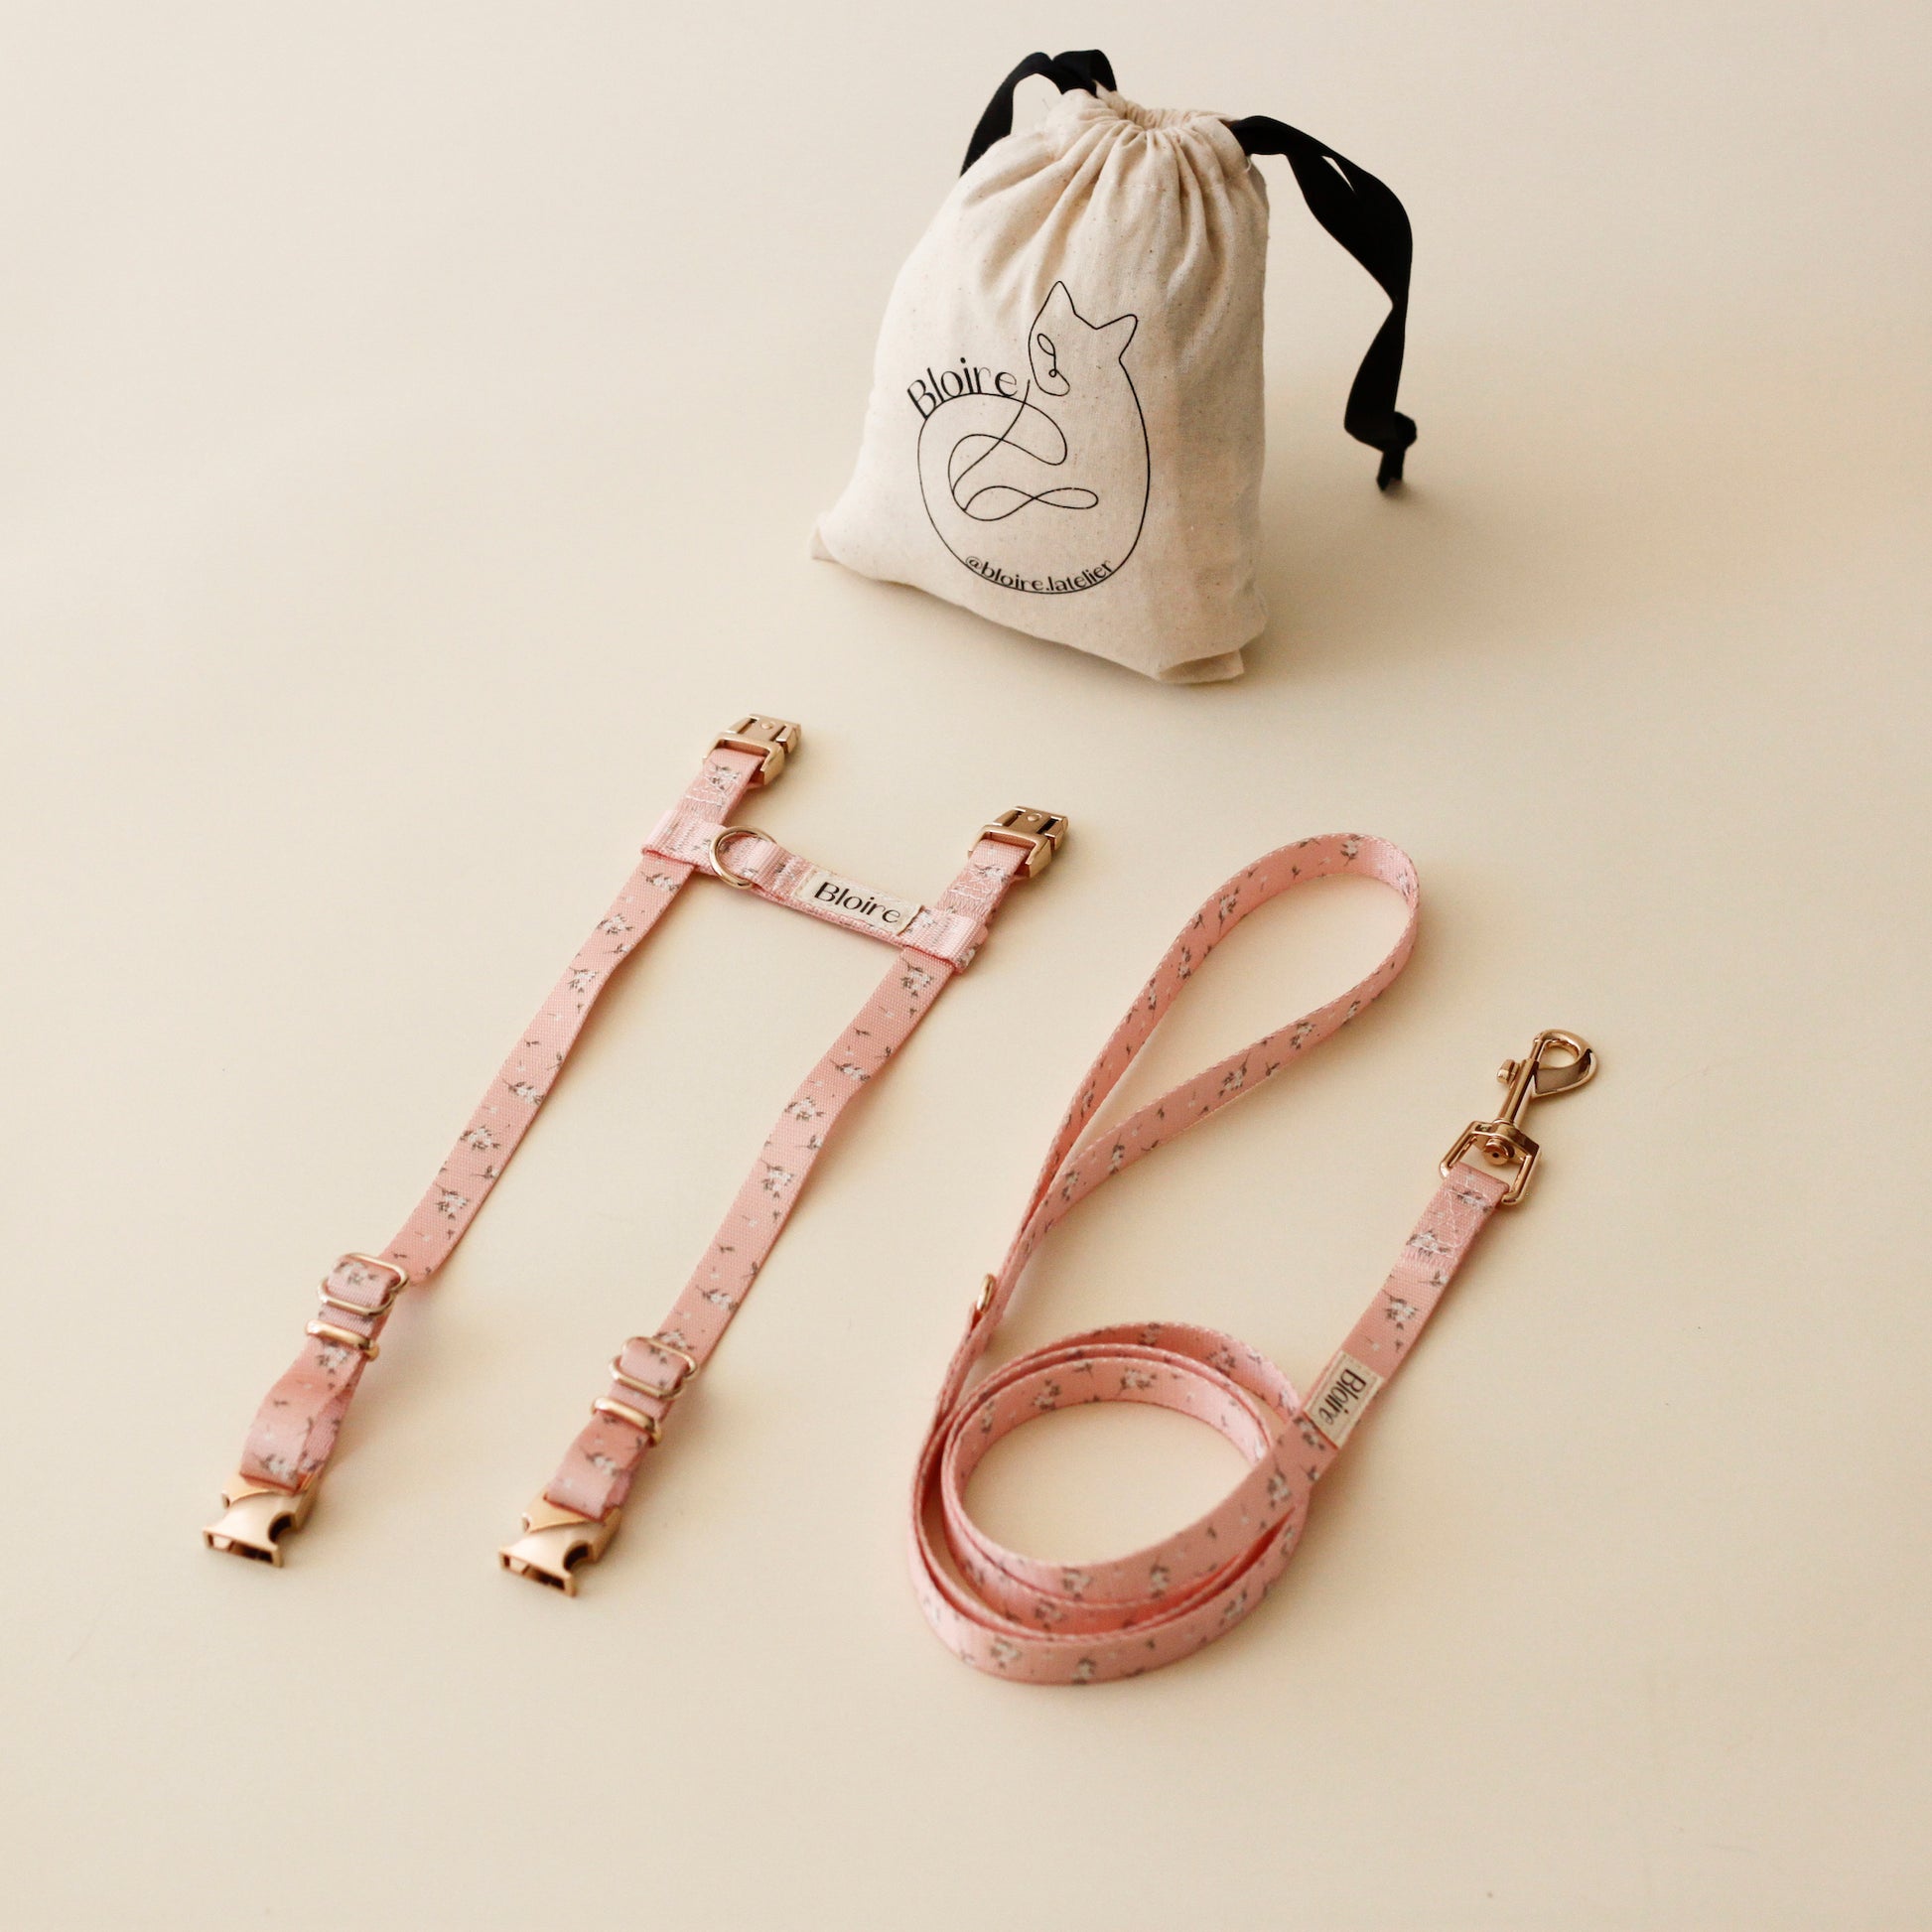 Bloire | Harness and Leash Walk Kit Meadow for Cat